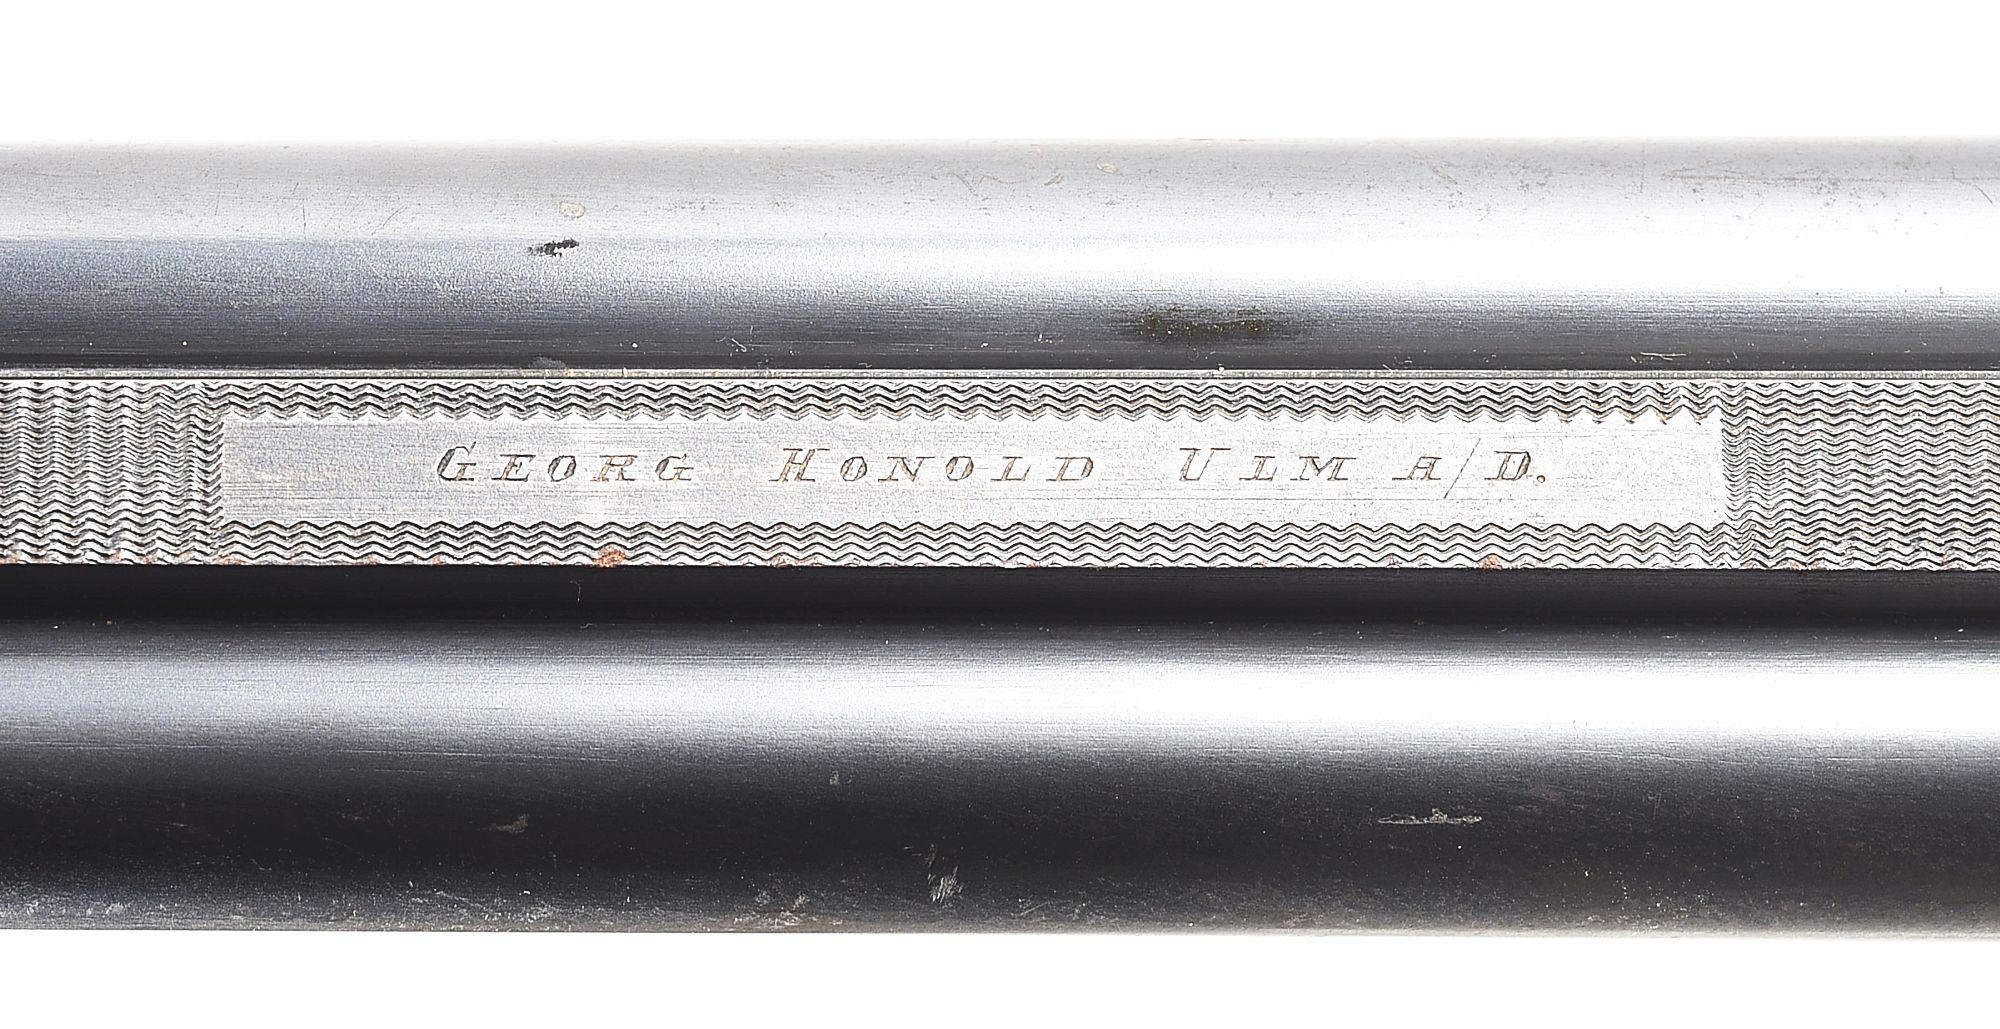 (C) ENGRAVED GEORG HONOLD DRILLING.